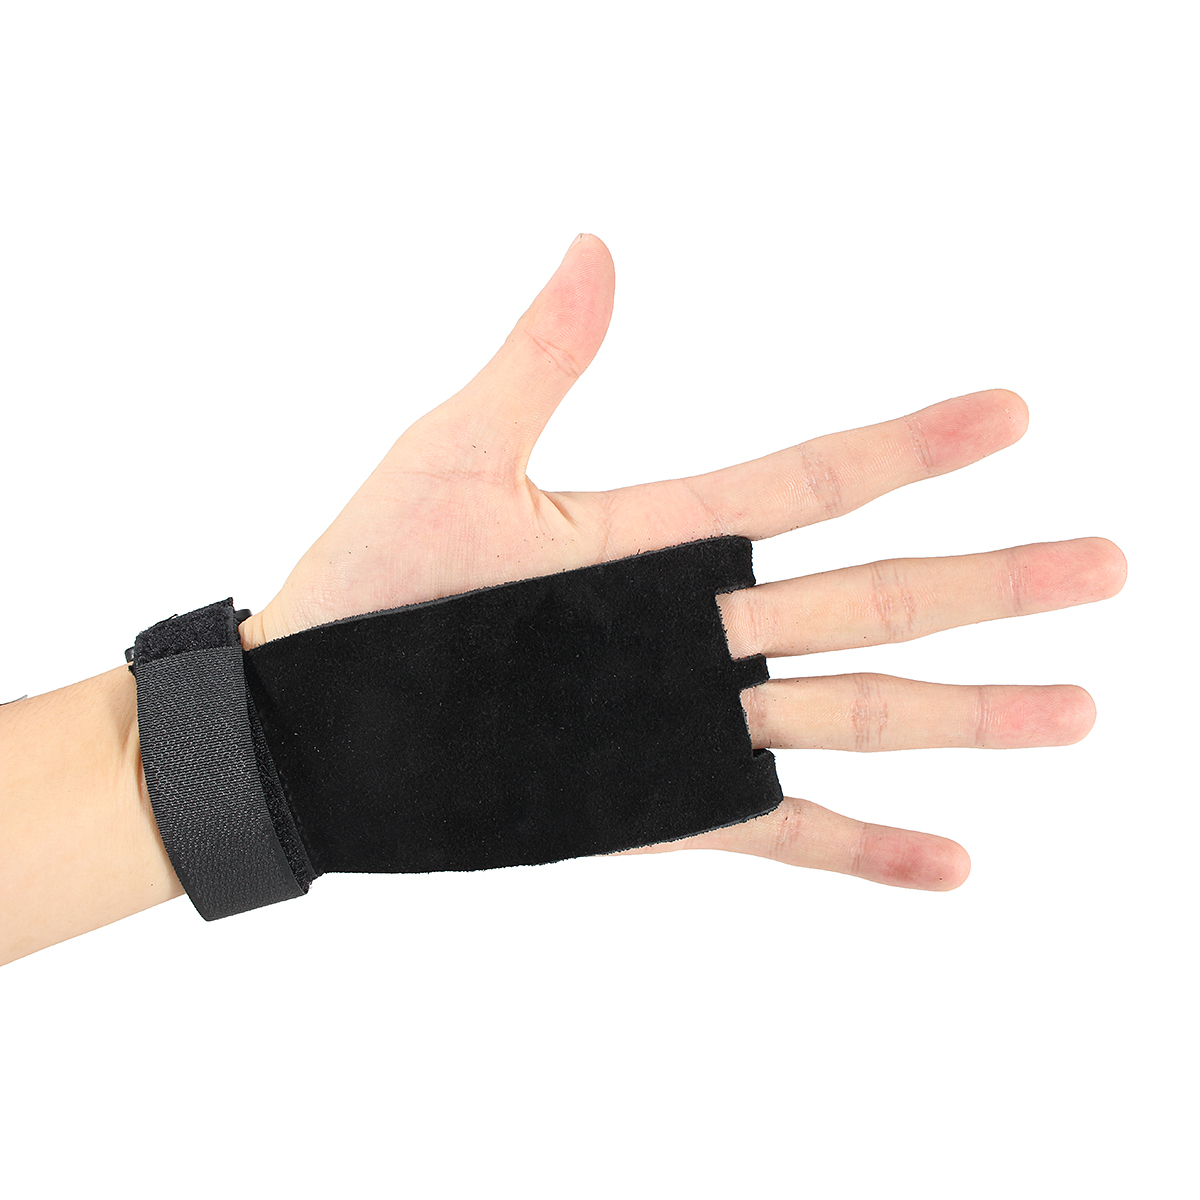 1Pair-Crossfit-Grips-for-Weight-lifting-Hand-Support-Gymnastics-Leather-Palm-Protectors-Hand-Guards-1226402-9